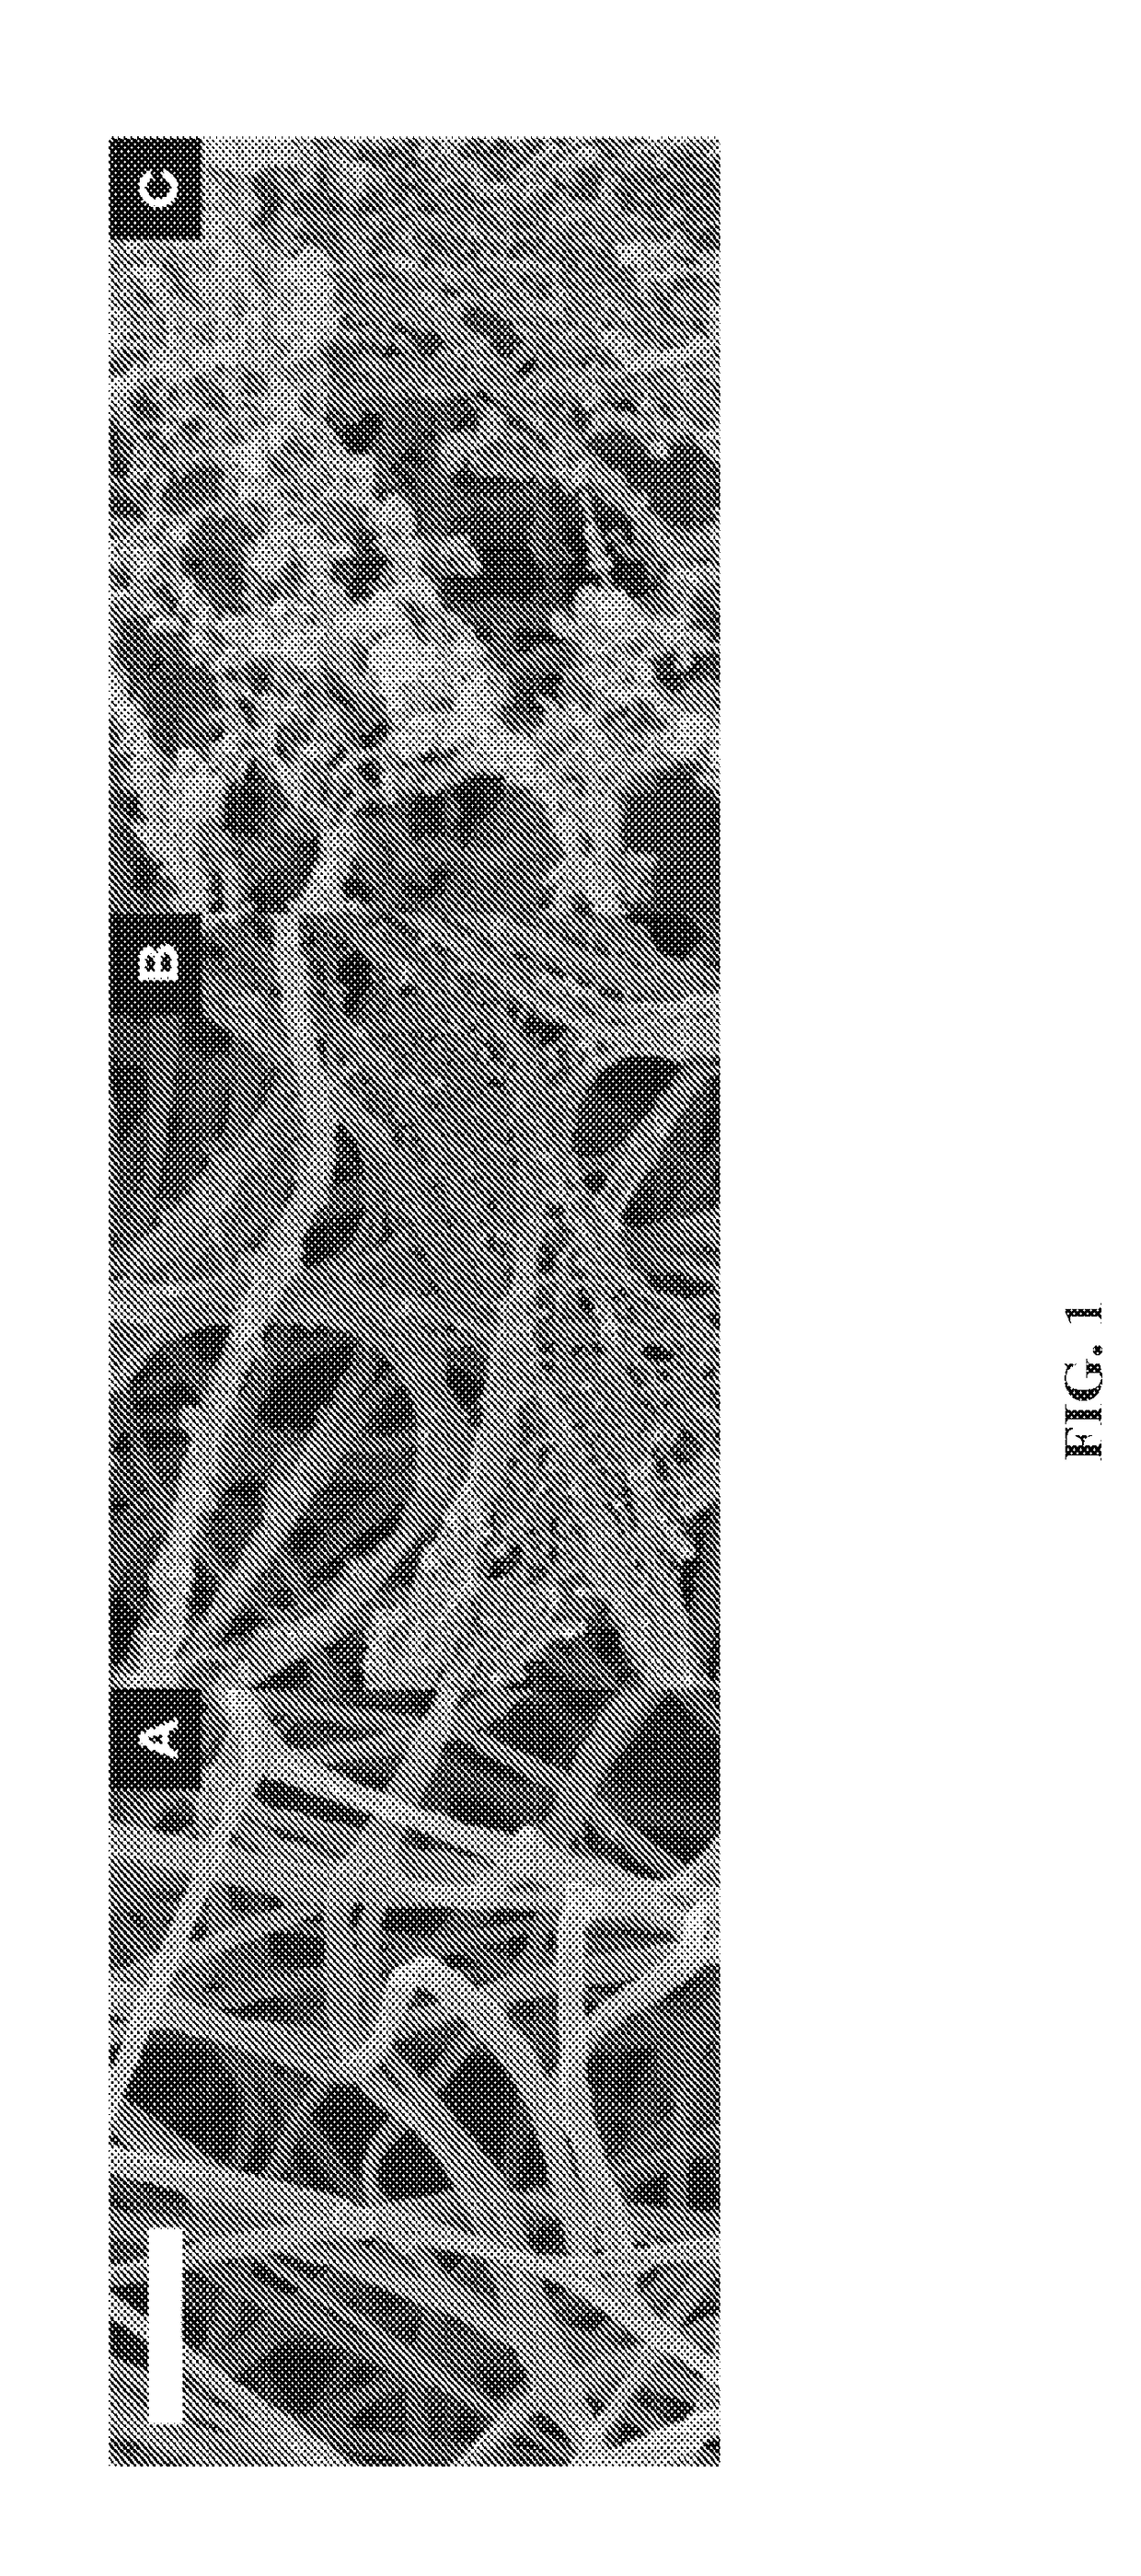 Cell-collagen-silica composites and methods of making and using the same